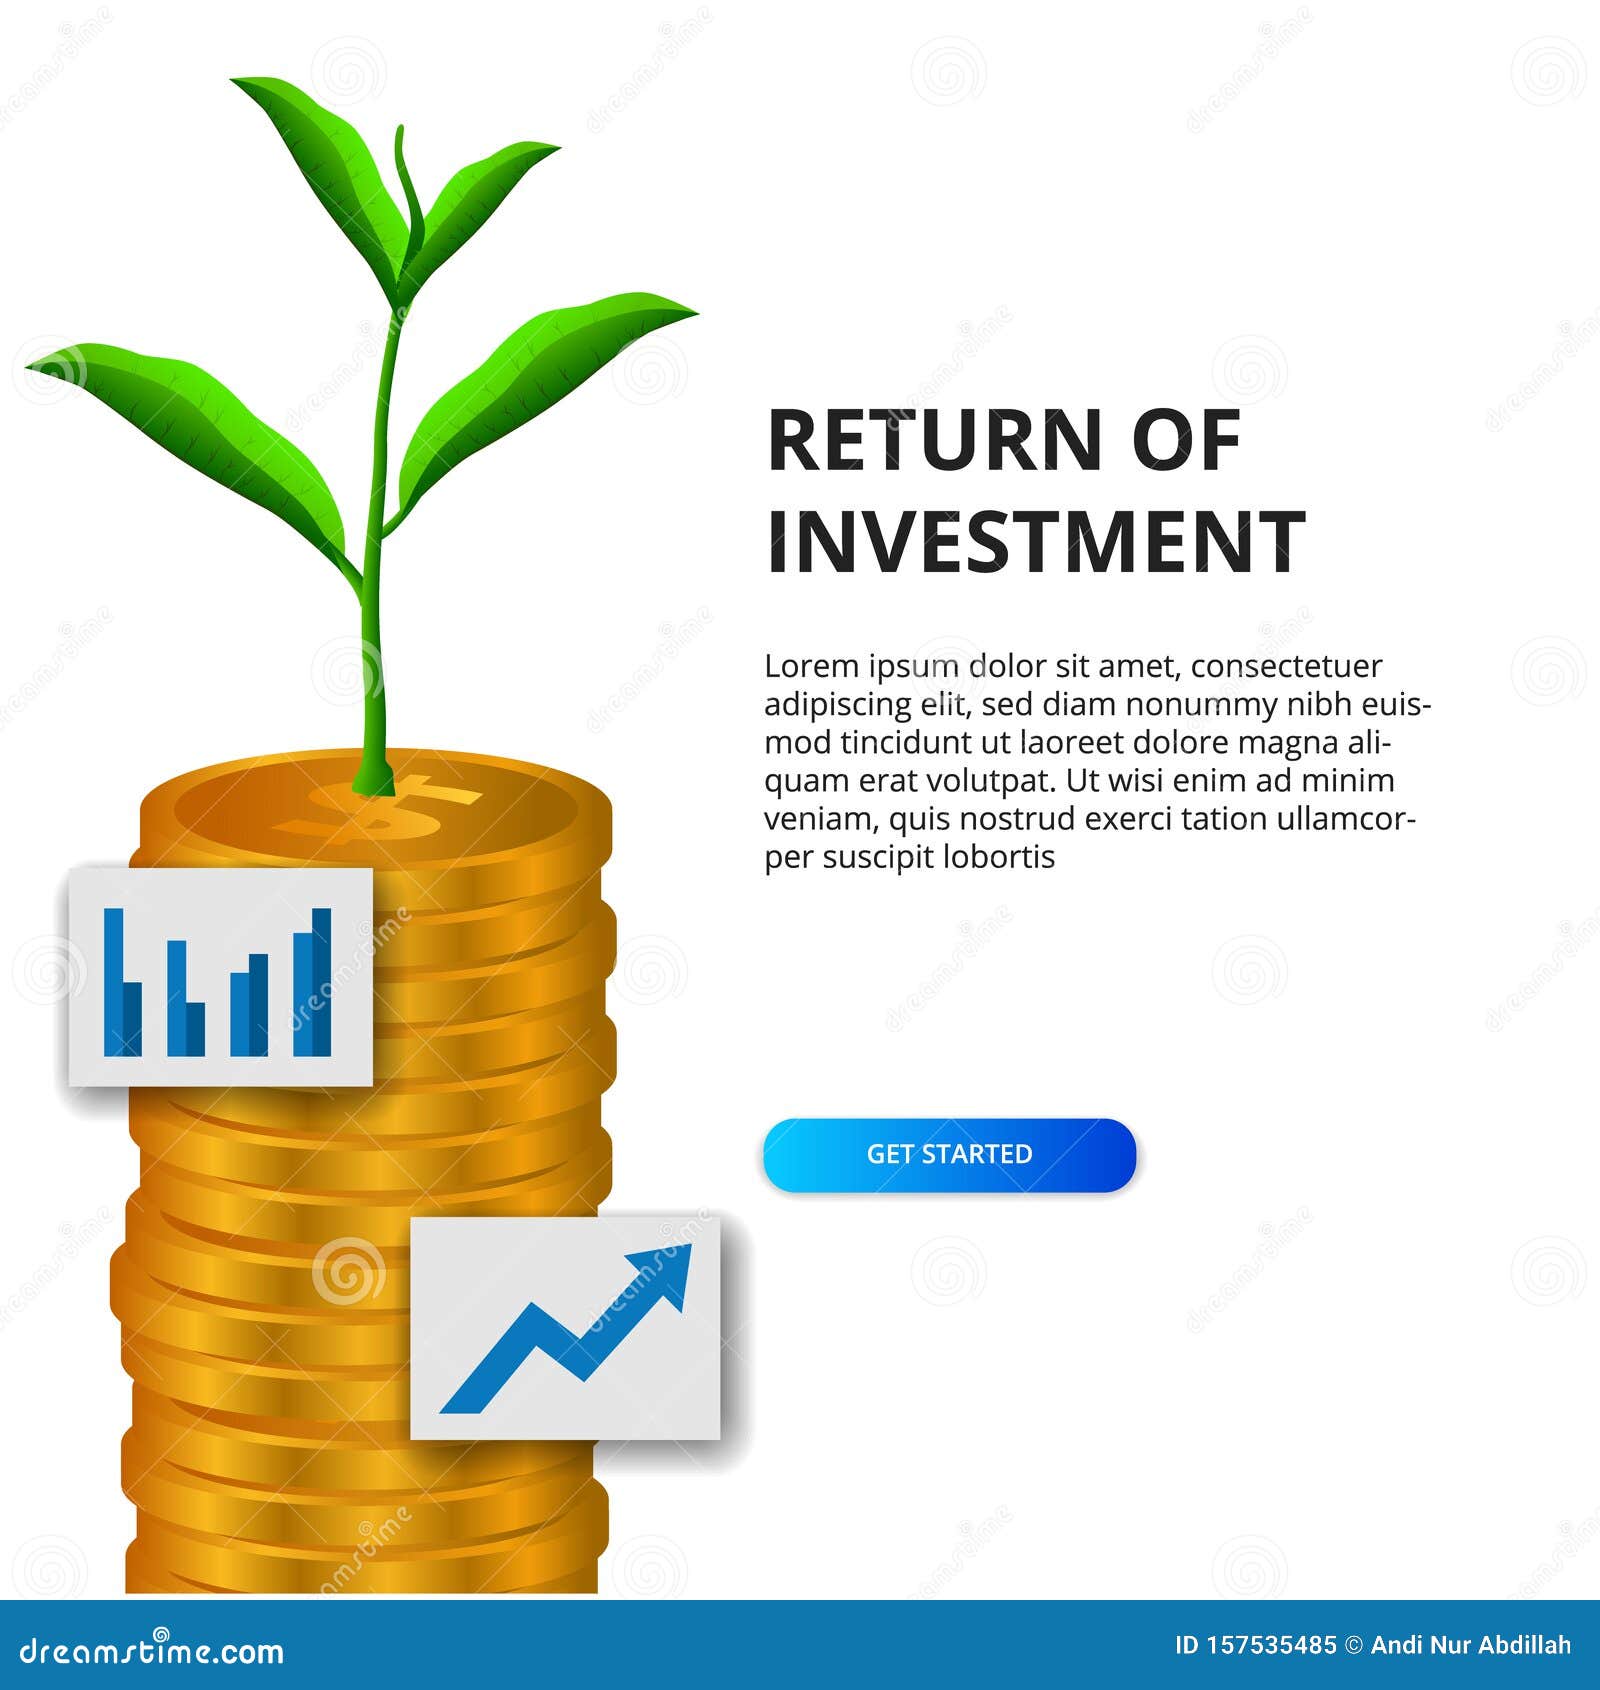 Return Of Investment Growth Investing Stock Market Golden